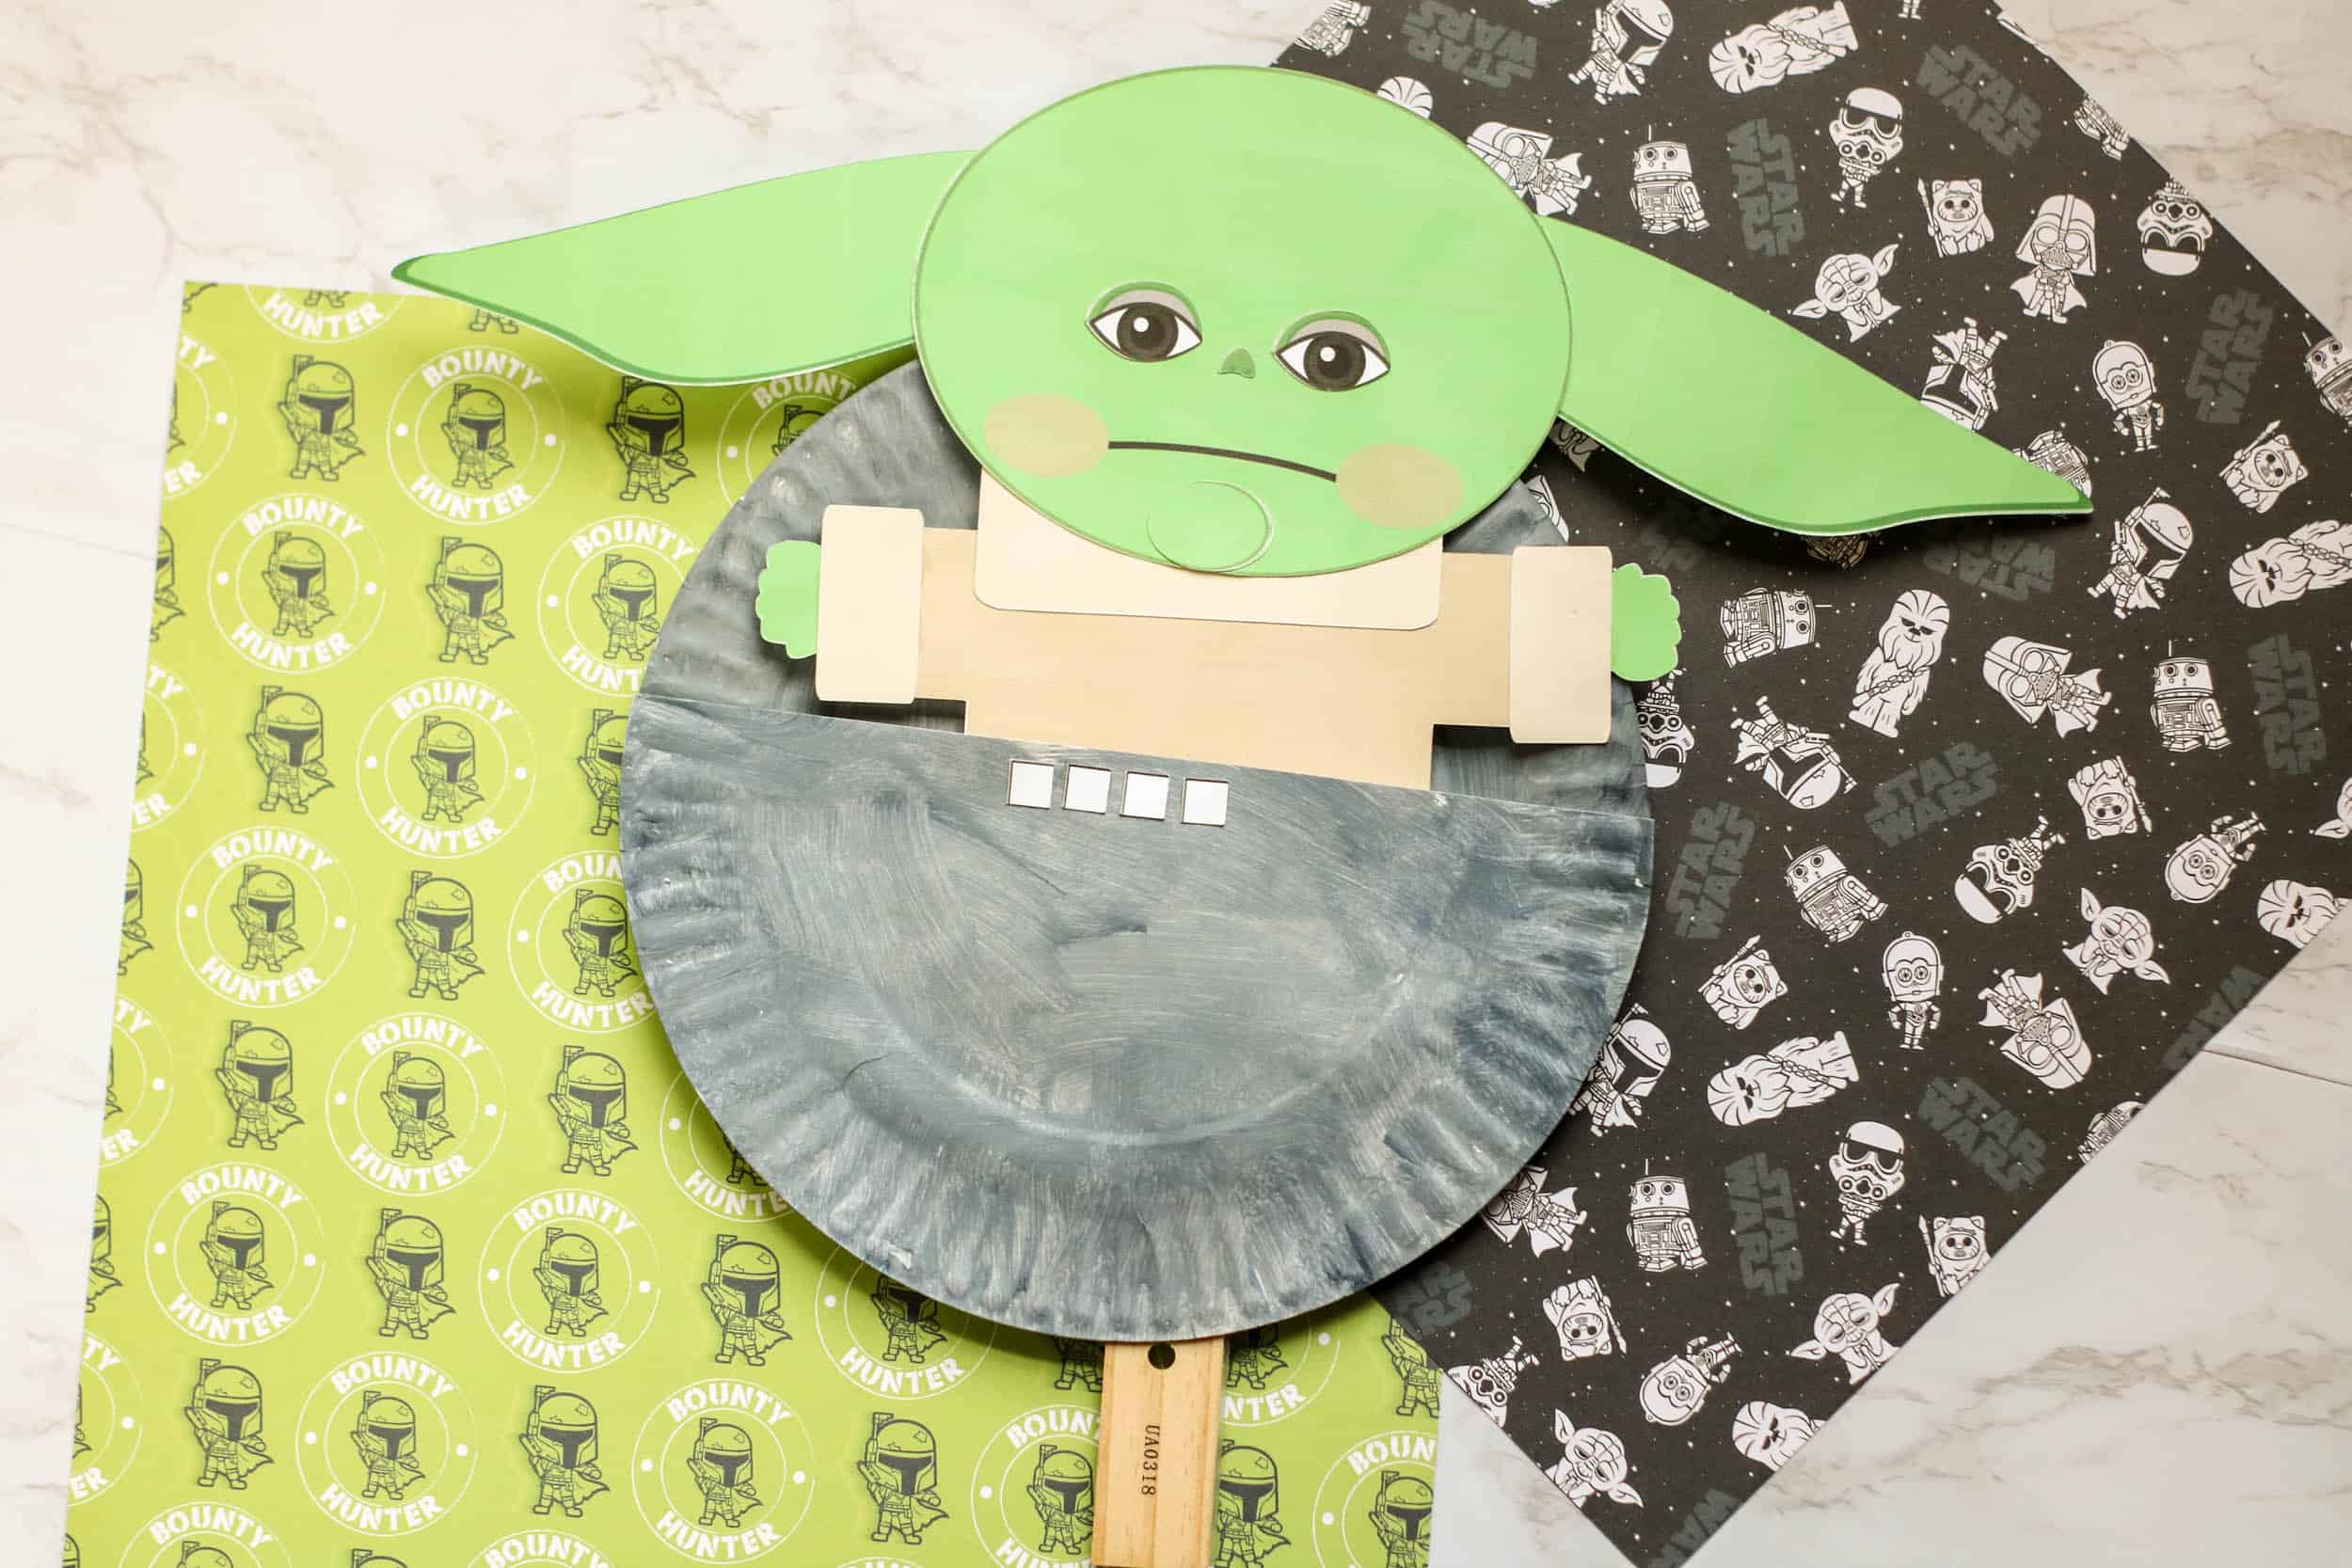 How to make a Baby Yoda puppet